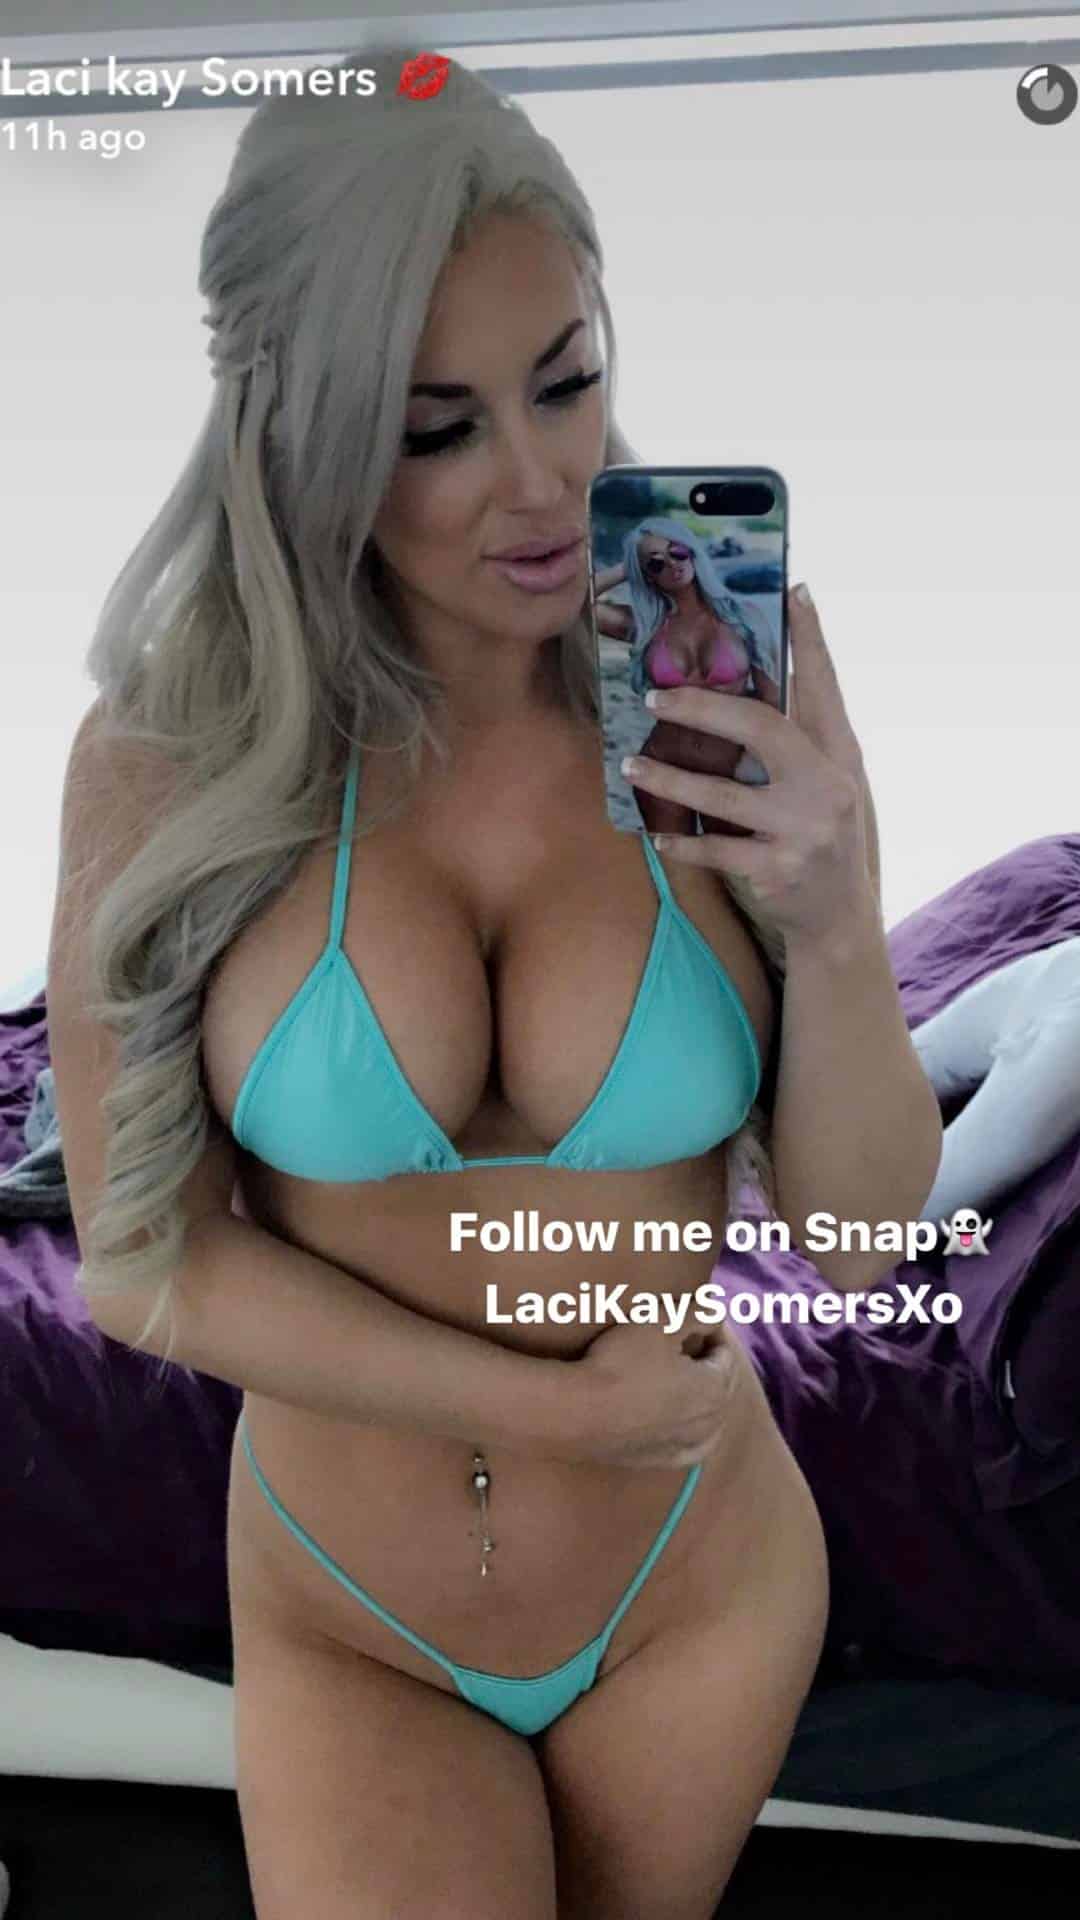 Laci kay somers private instagram